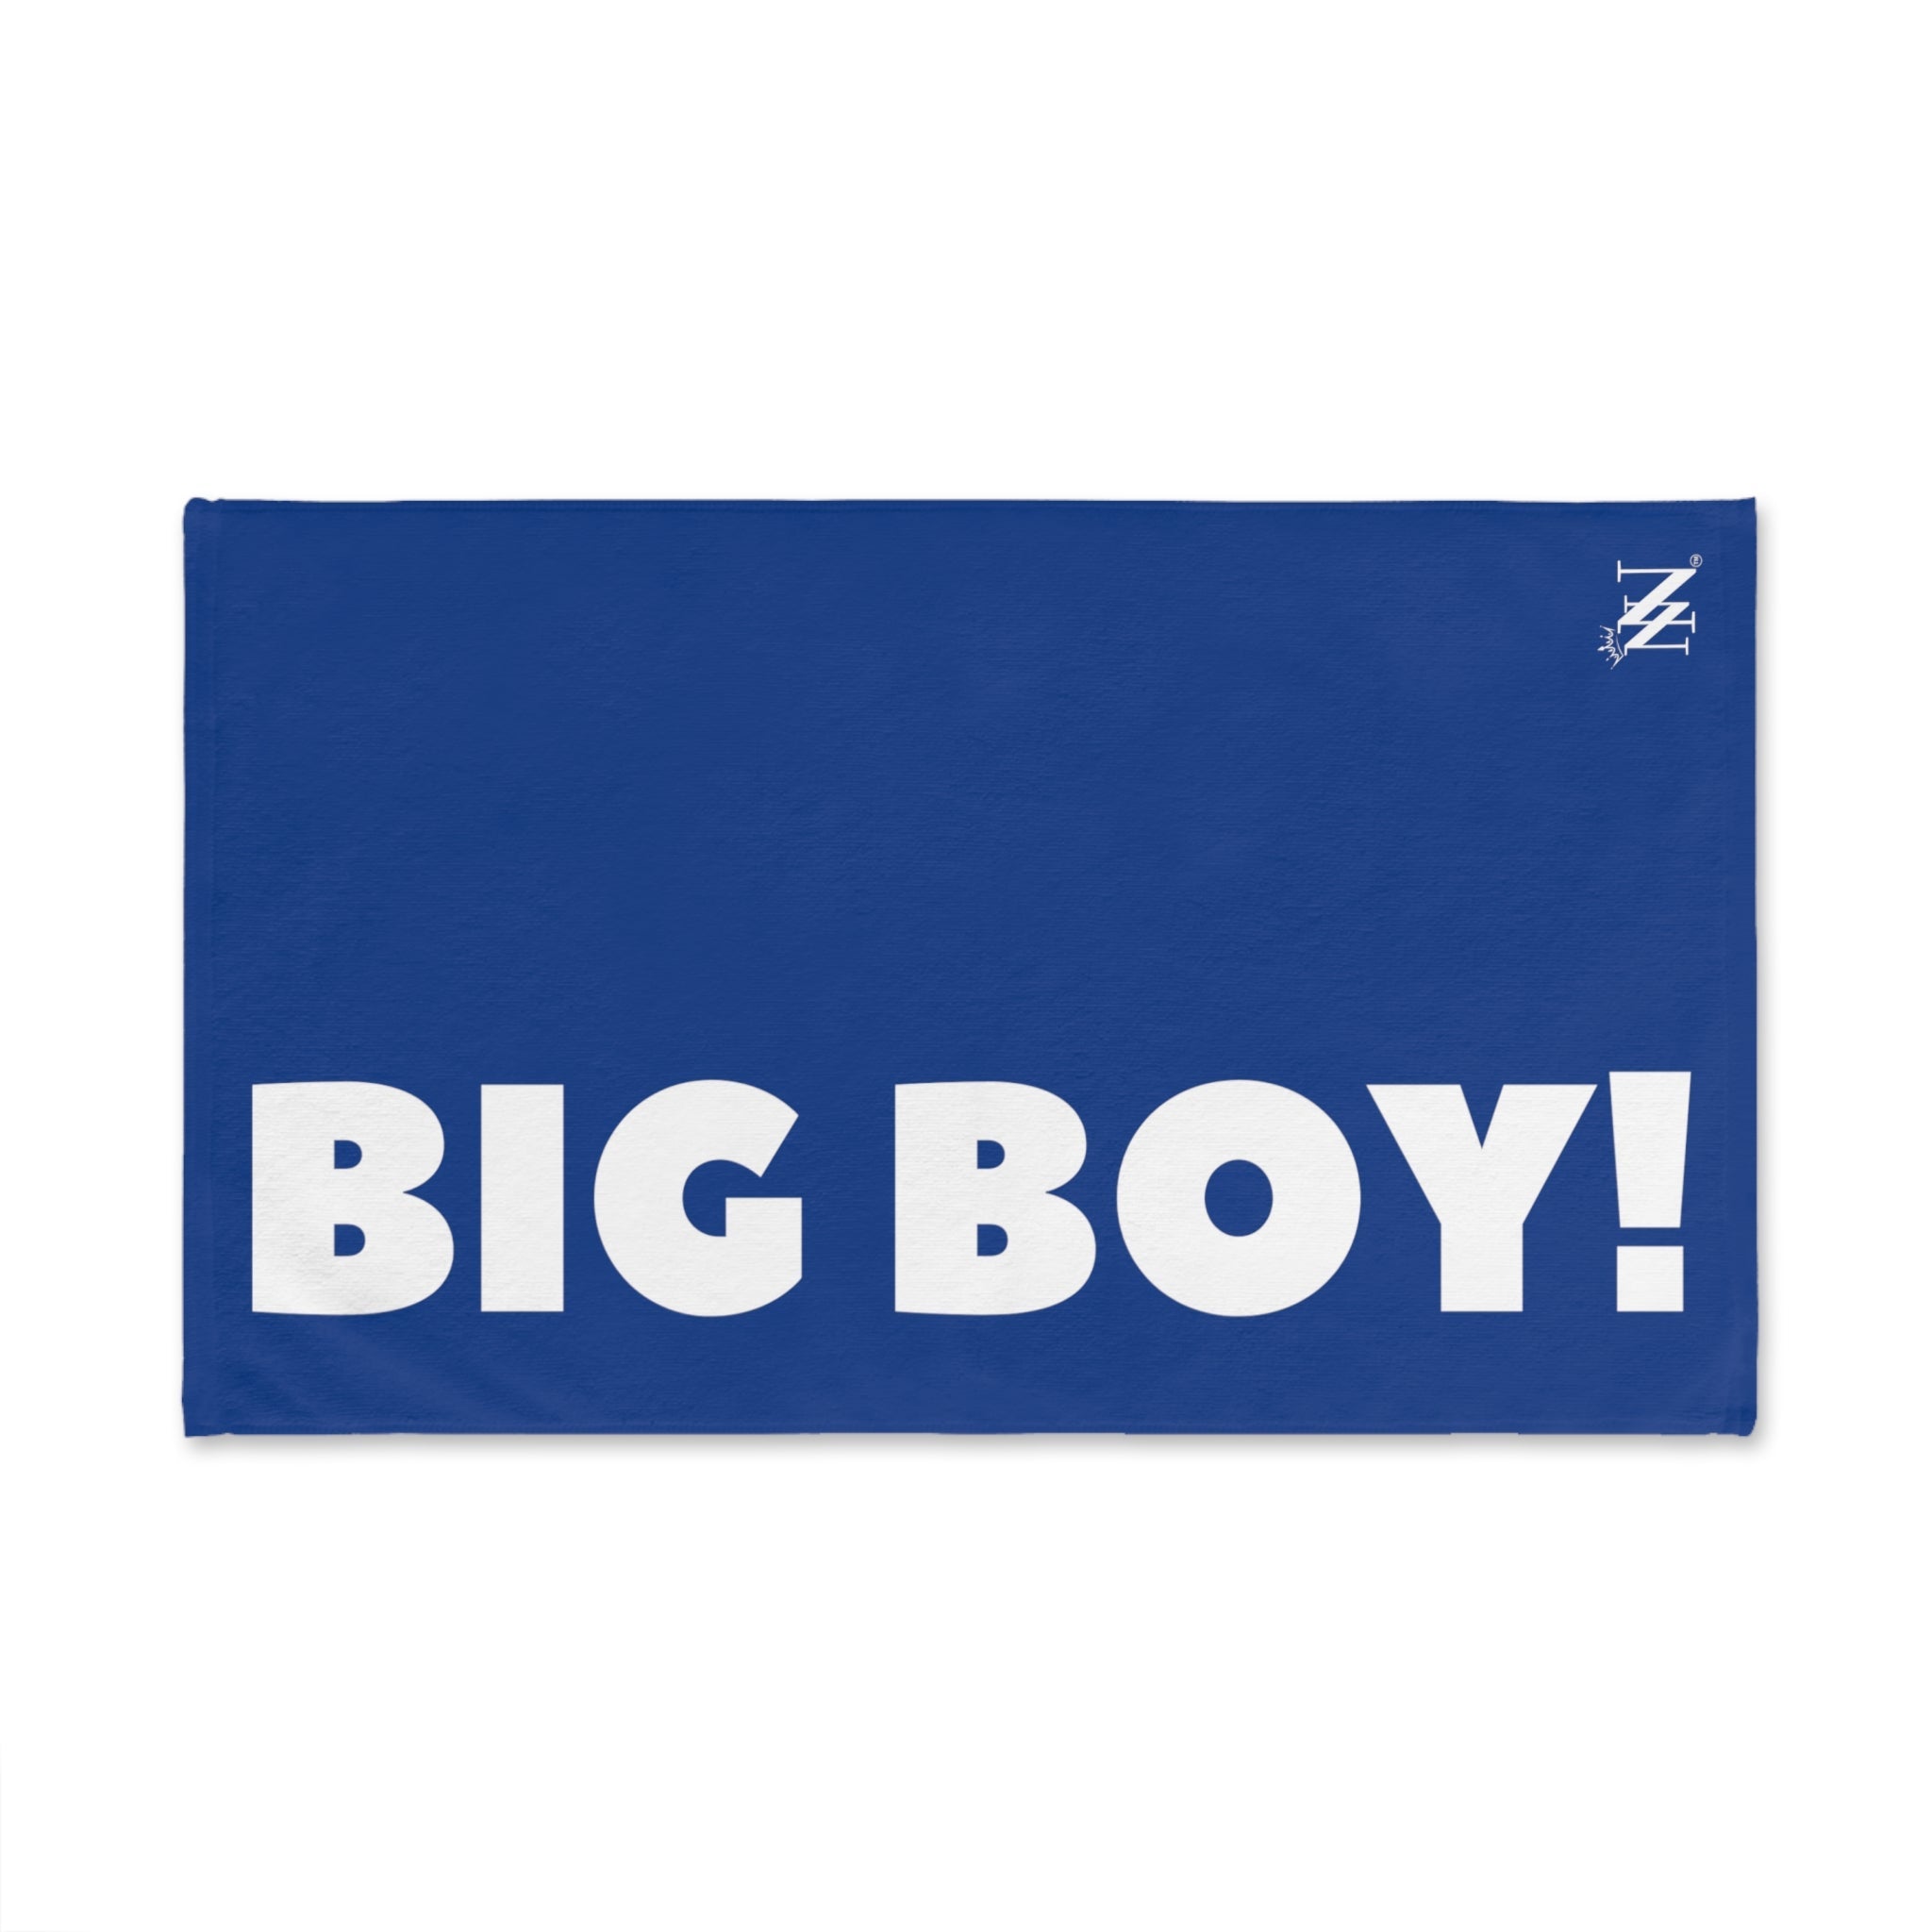 Big Boy Man Blue | Gifts for Boyfriend, Funny Towel Romantic Gift for Wedding Couple Fiance First Year Anniversary Valentines, Party Gag Gifts, Joke Humor Cloth for Husband Men BF NECTAR NAPKINS